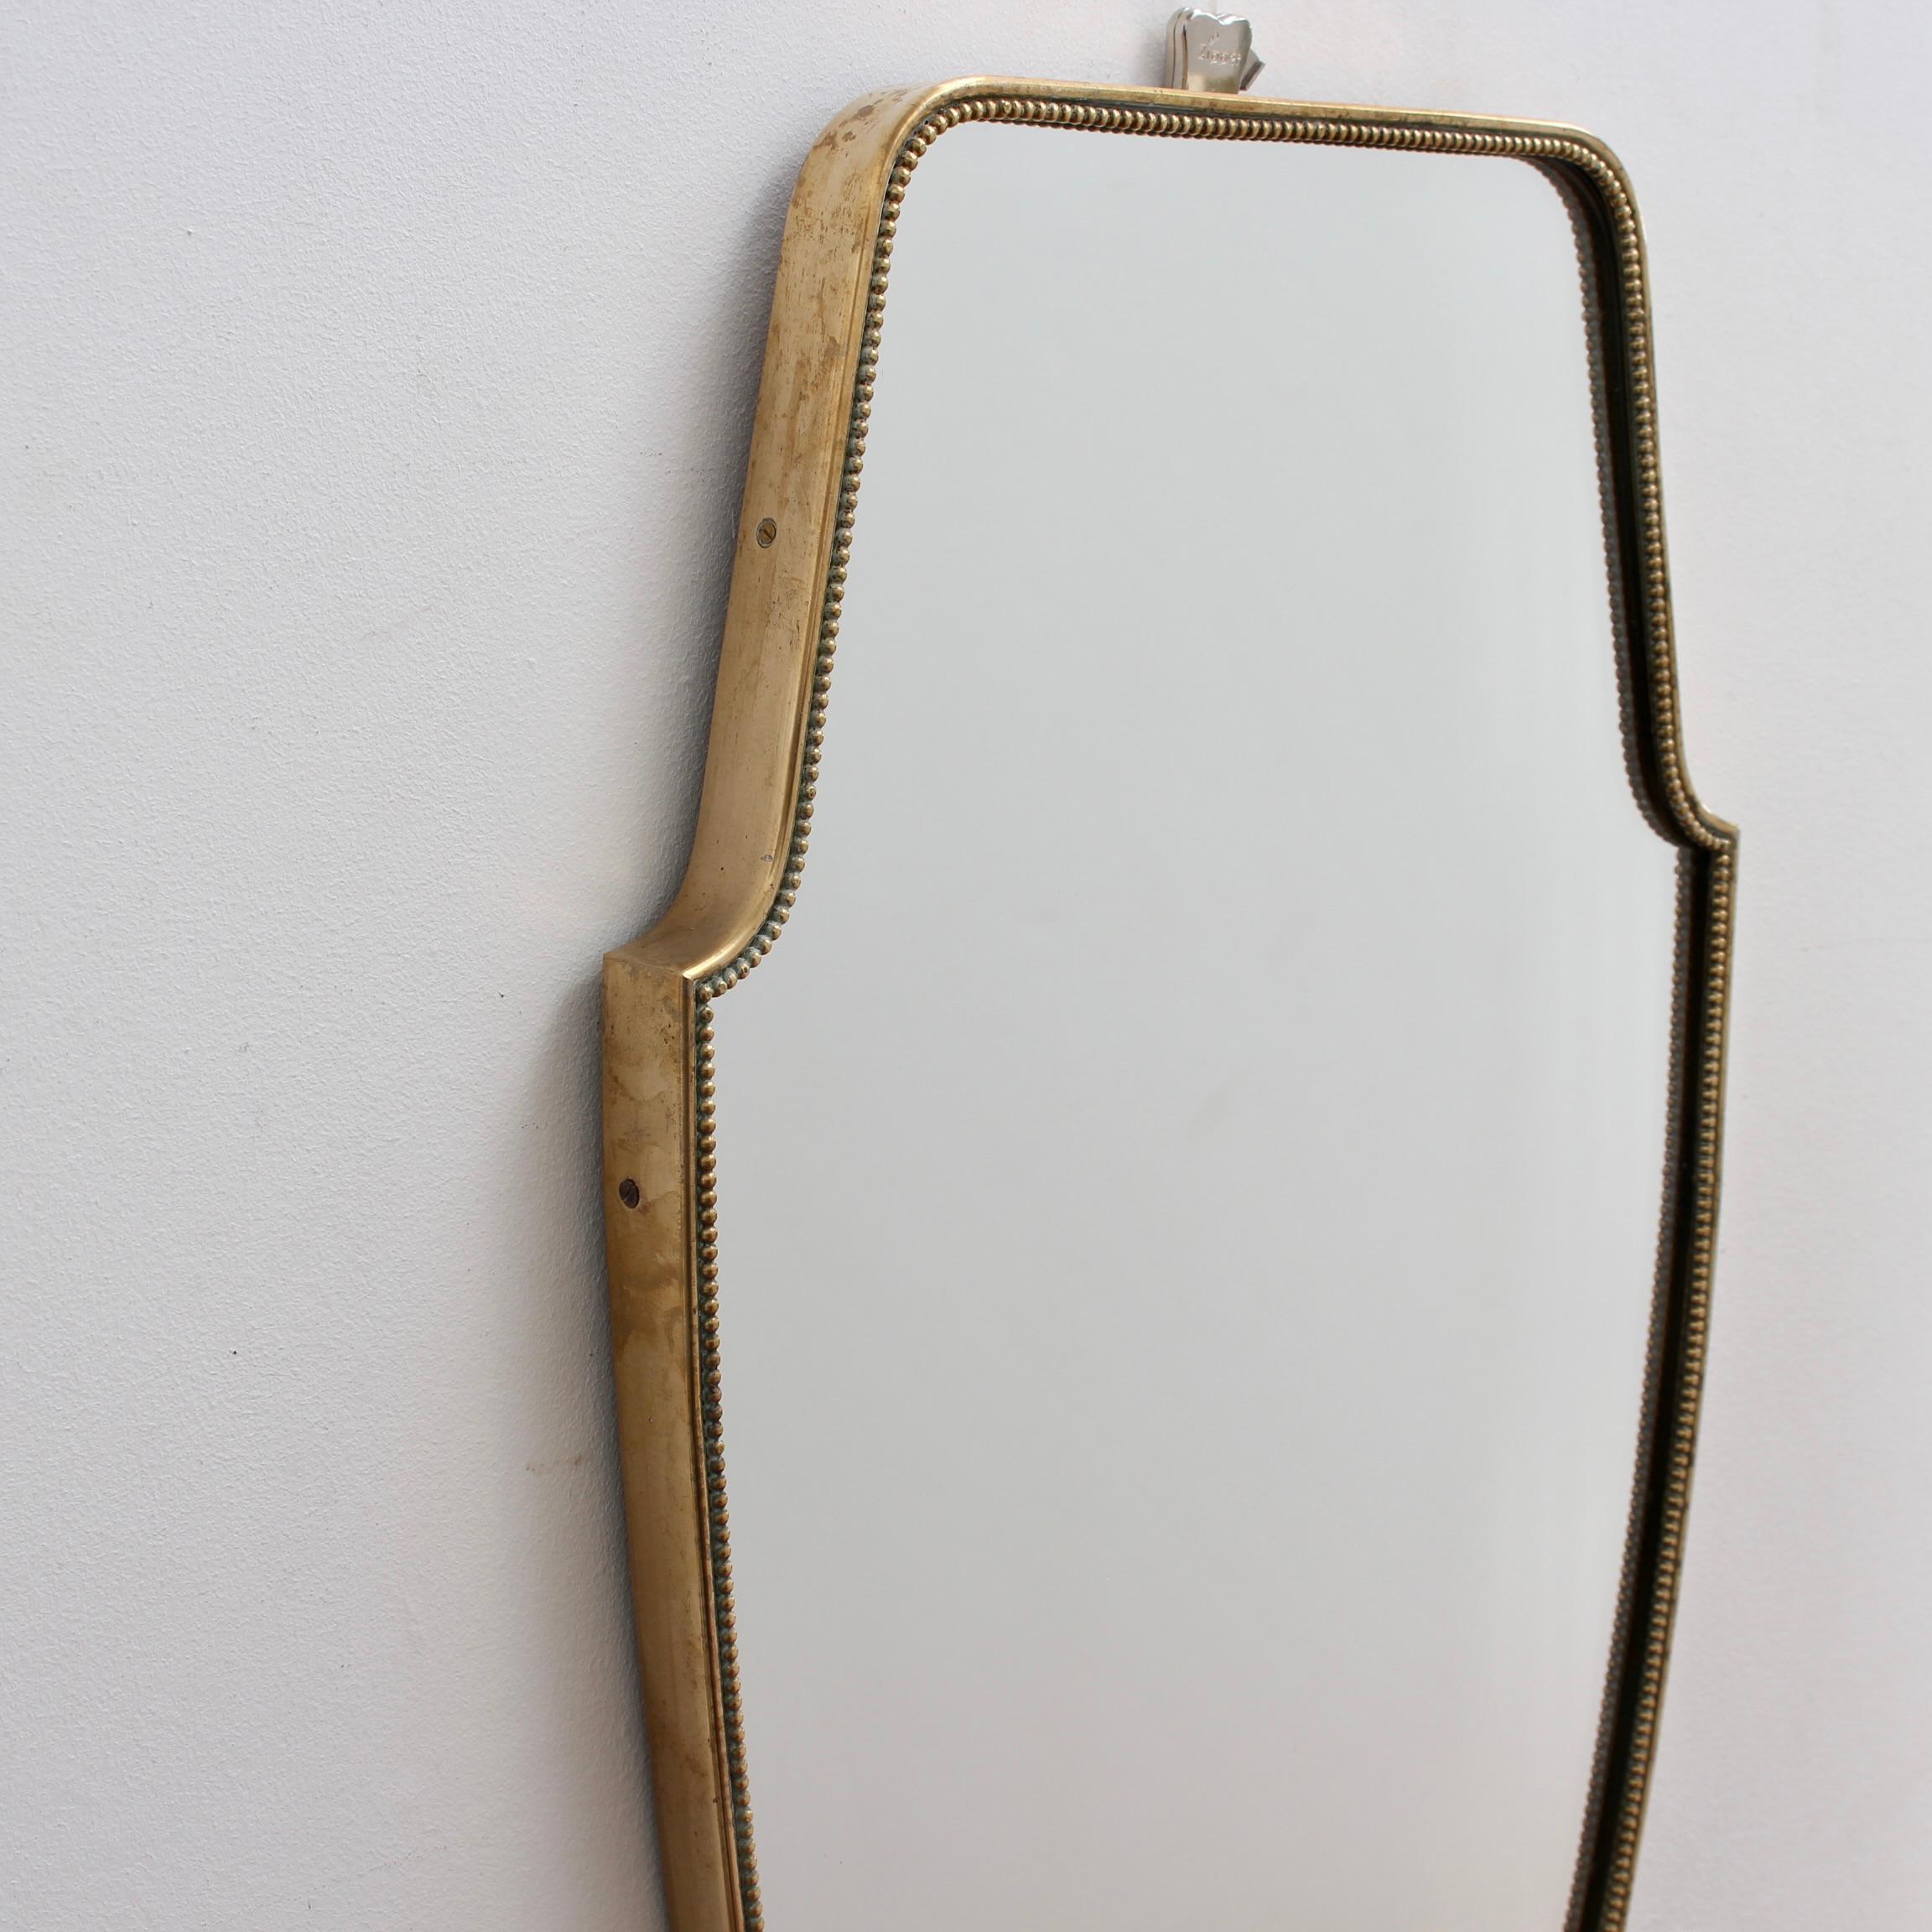 Mid-20th Century Vintage Italian Wall Mirror with Brass Frame and Beading, 'circa 1950s'